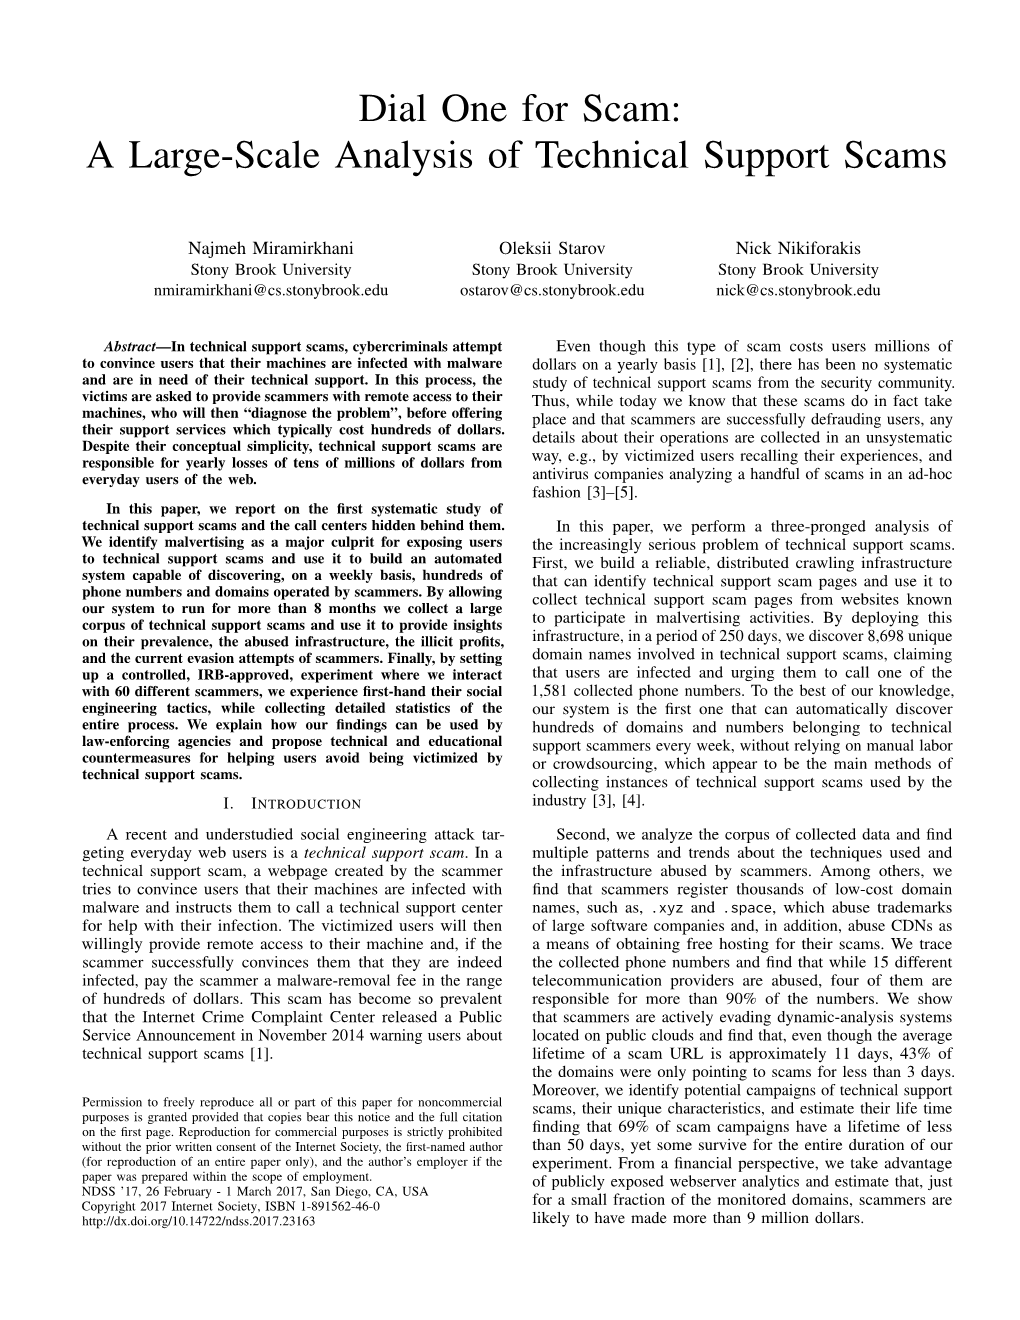 Dial One for Scam: a Large-Scale Analysis of Technical Support Scams